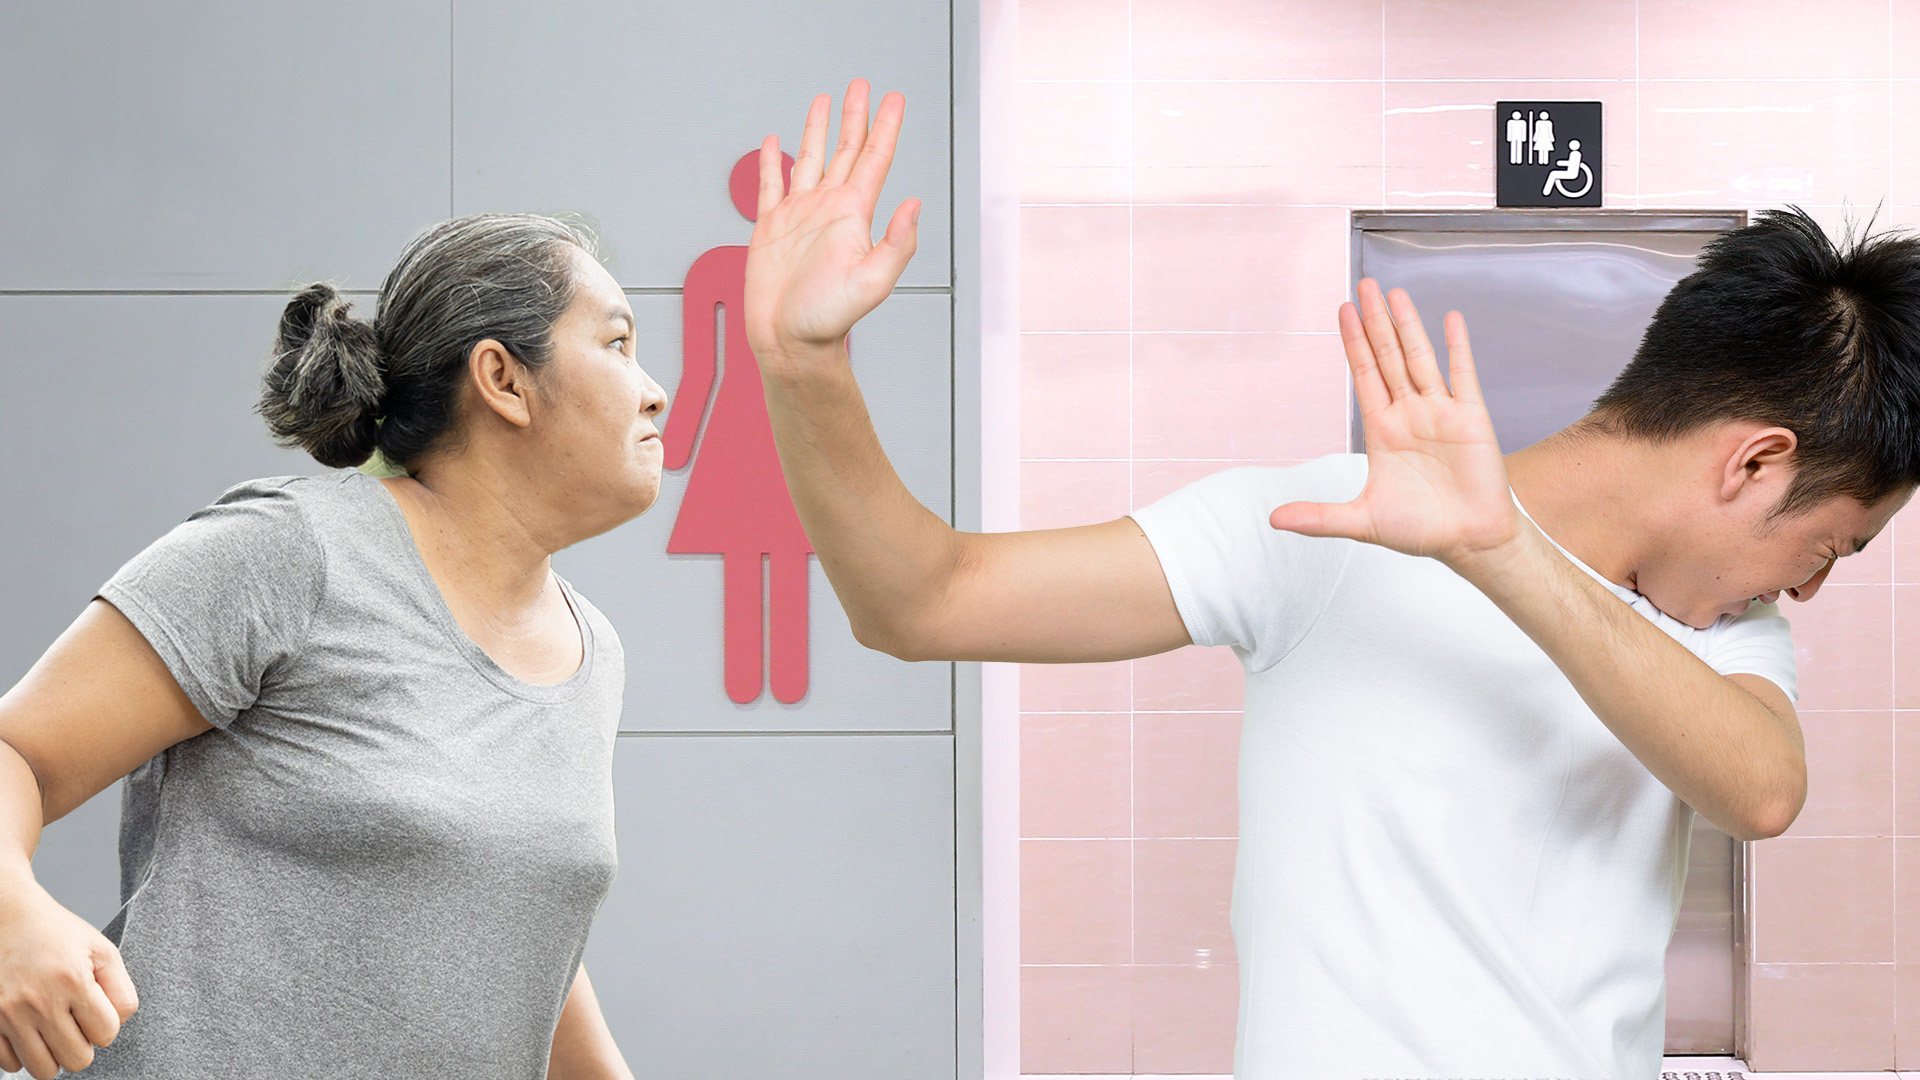 An angry mother in China slapped and kicked her adult son after he was caught filming illicitly in a public toilet for women. Photo: SCMP composite/Shutterstock